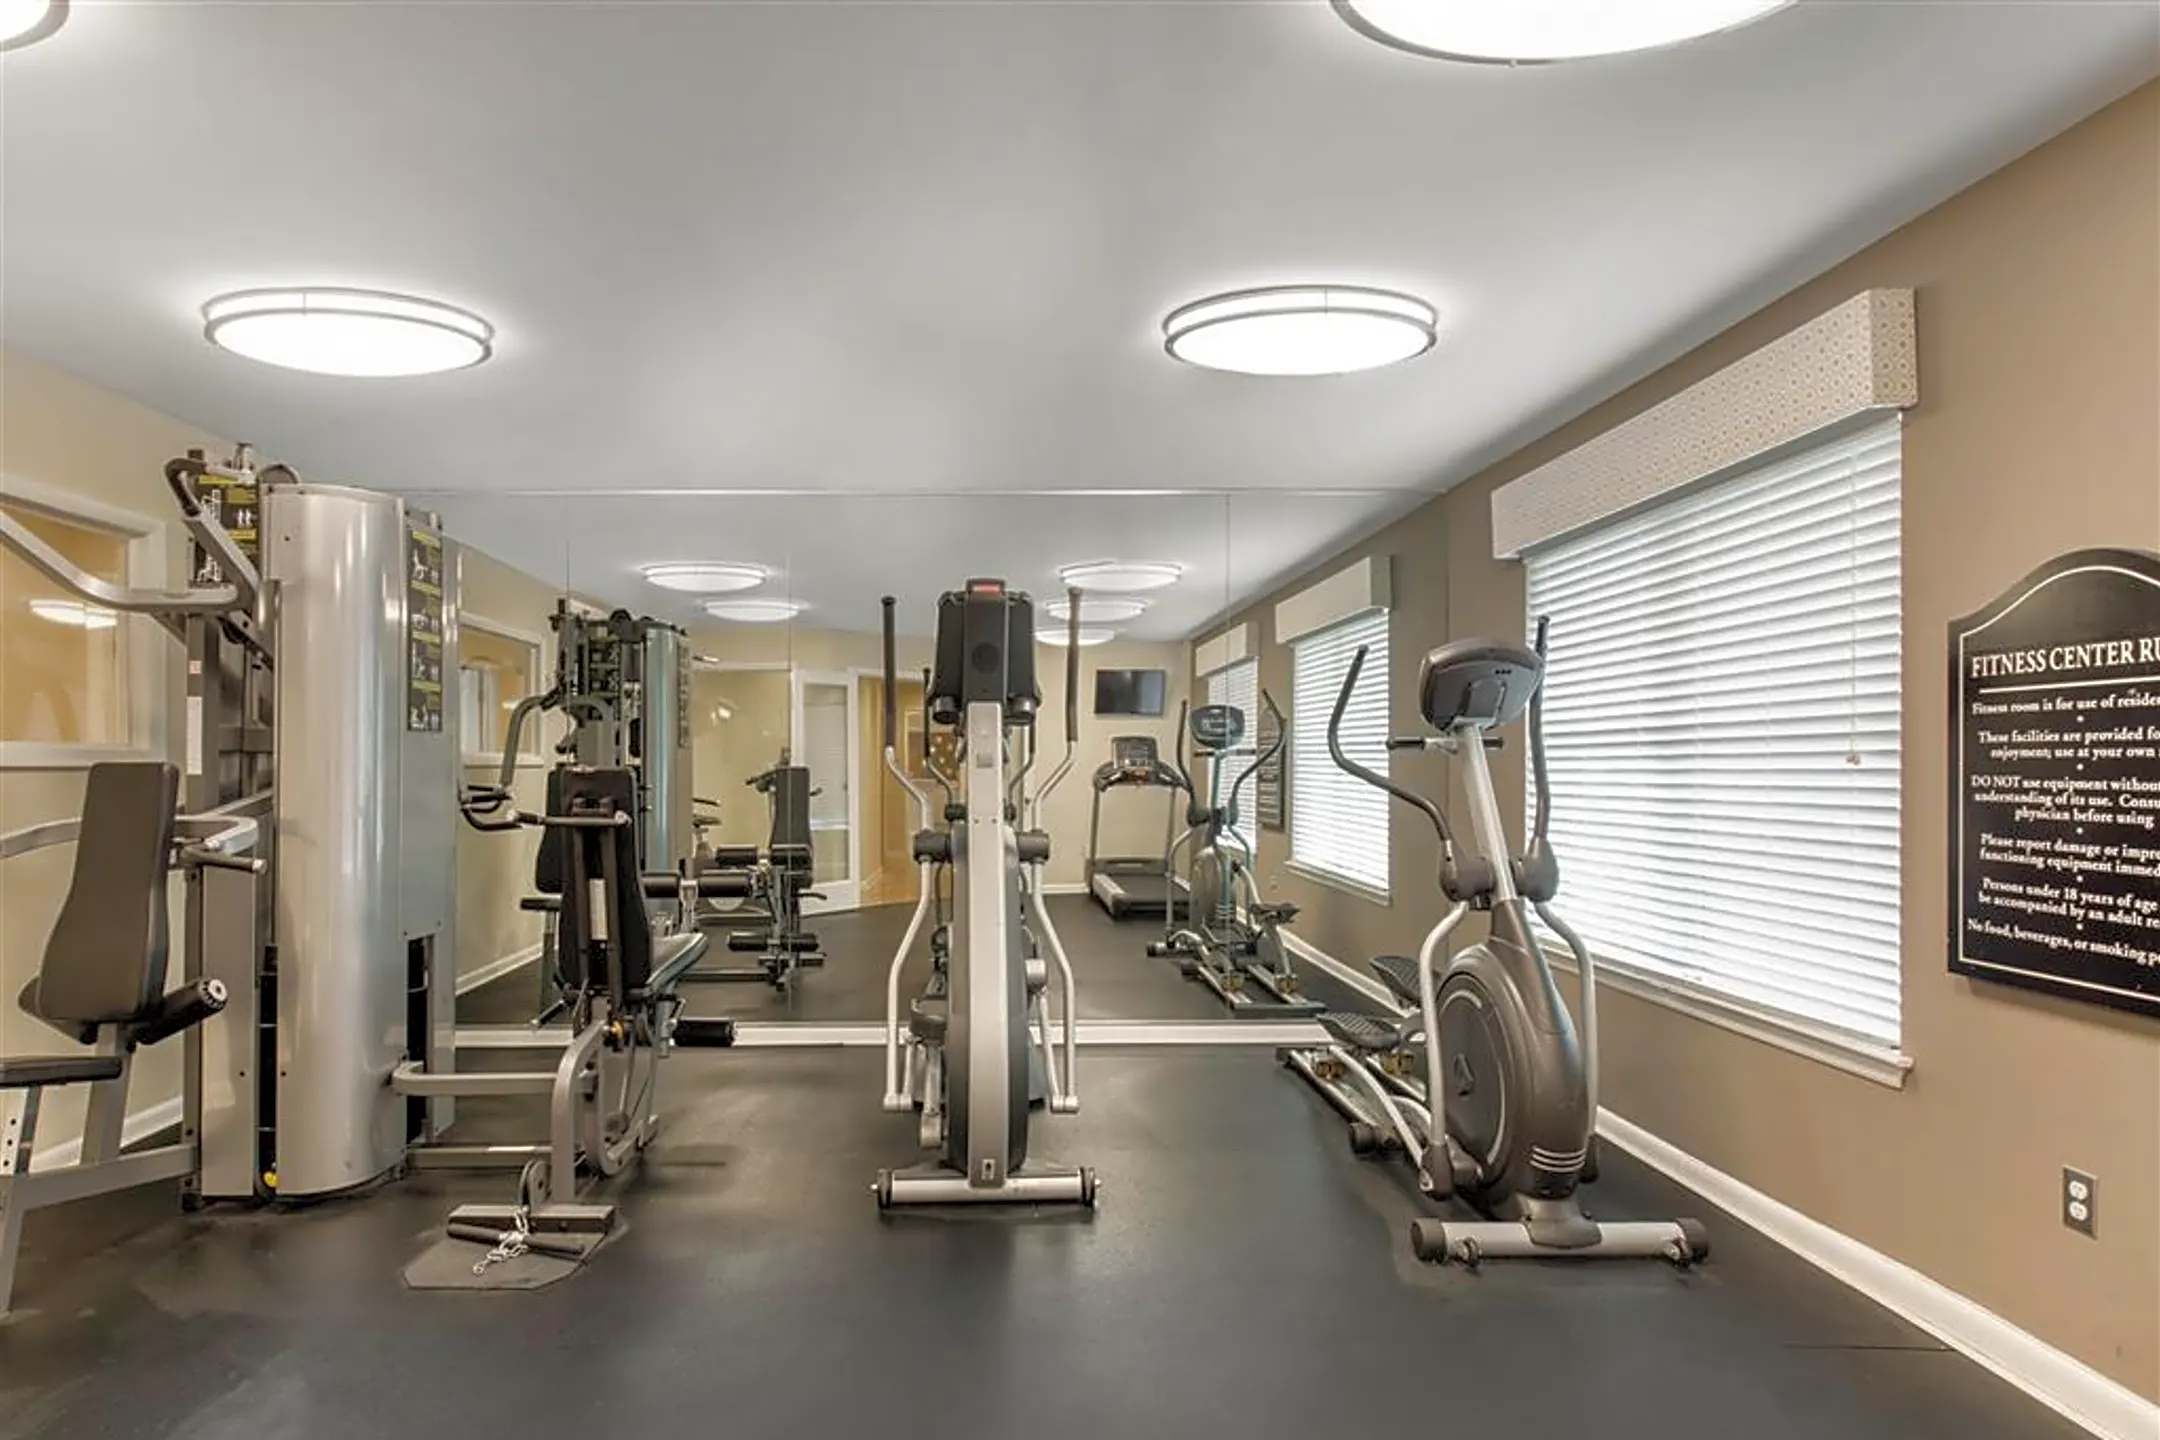 Fitness Weight Room - The Verandahs Apartments - Montgomery Village, MD